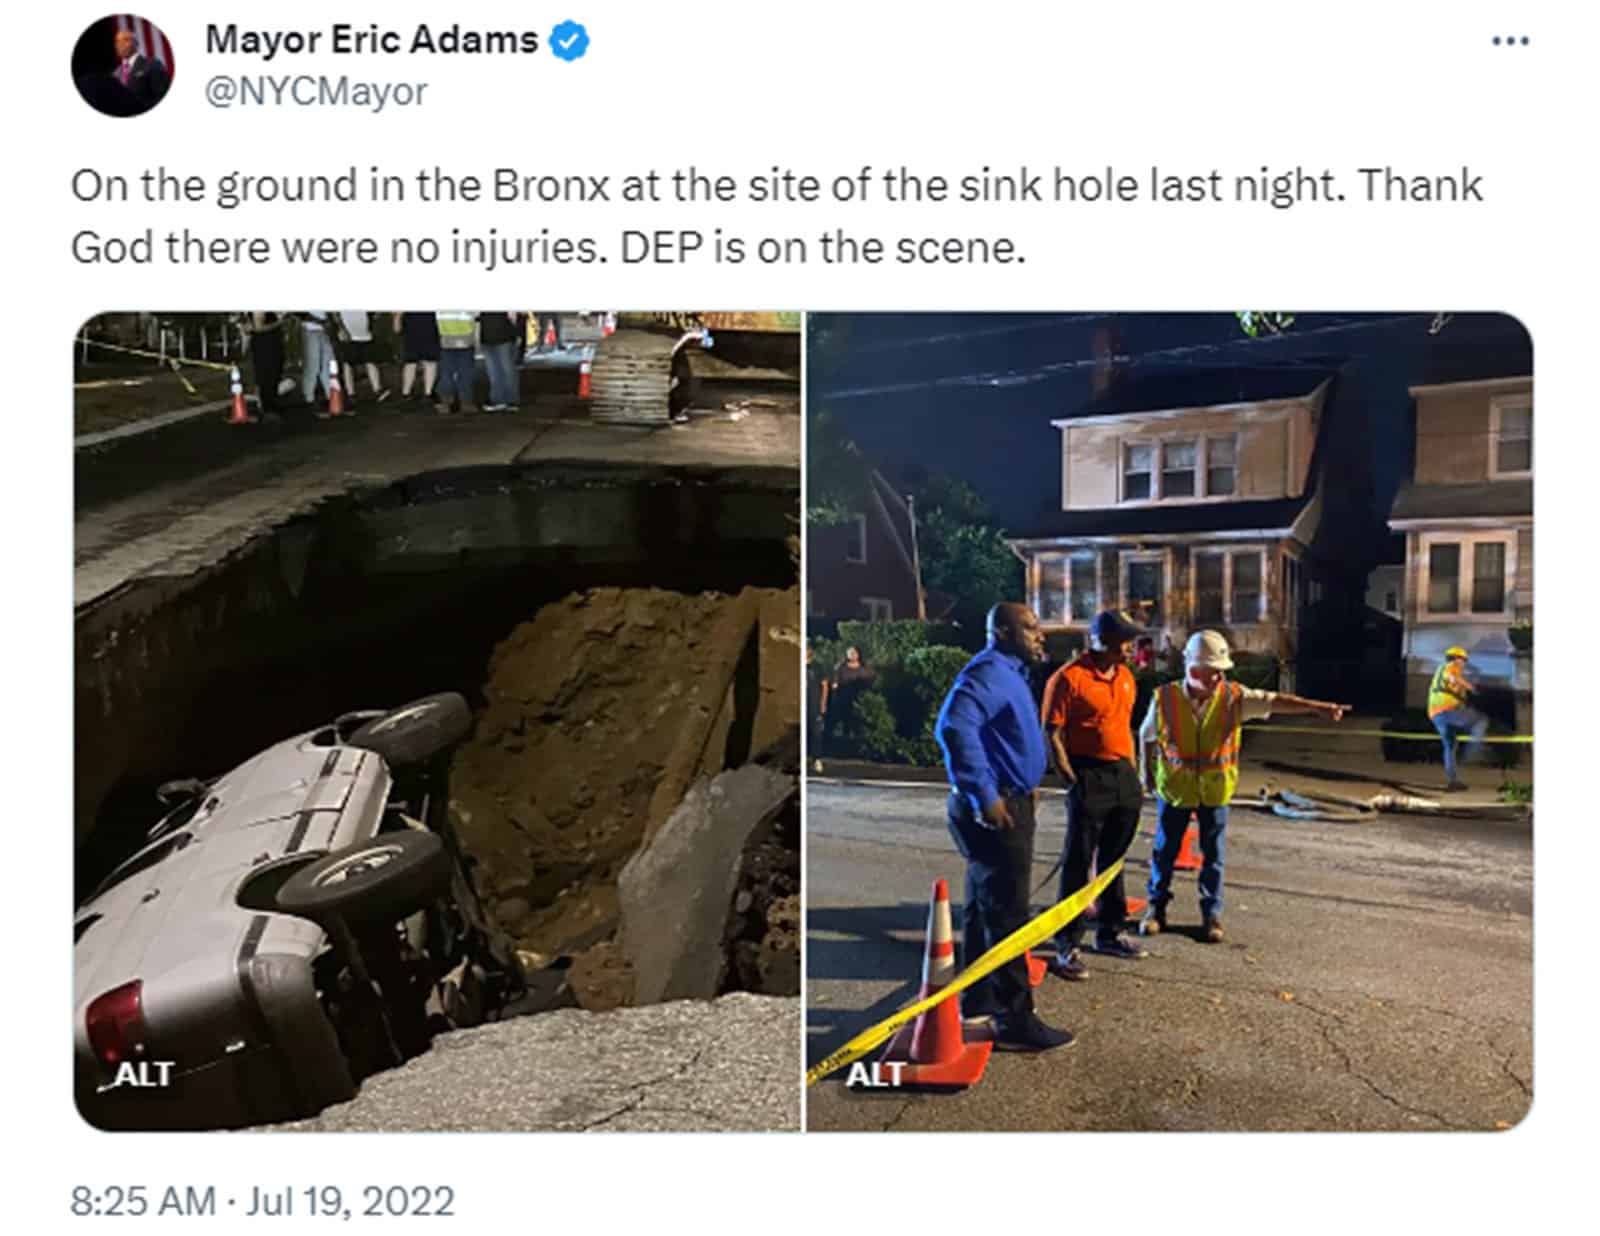 Twitter post from NYC Mayor Adams about a sinkhole in the Bronx